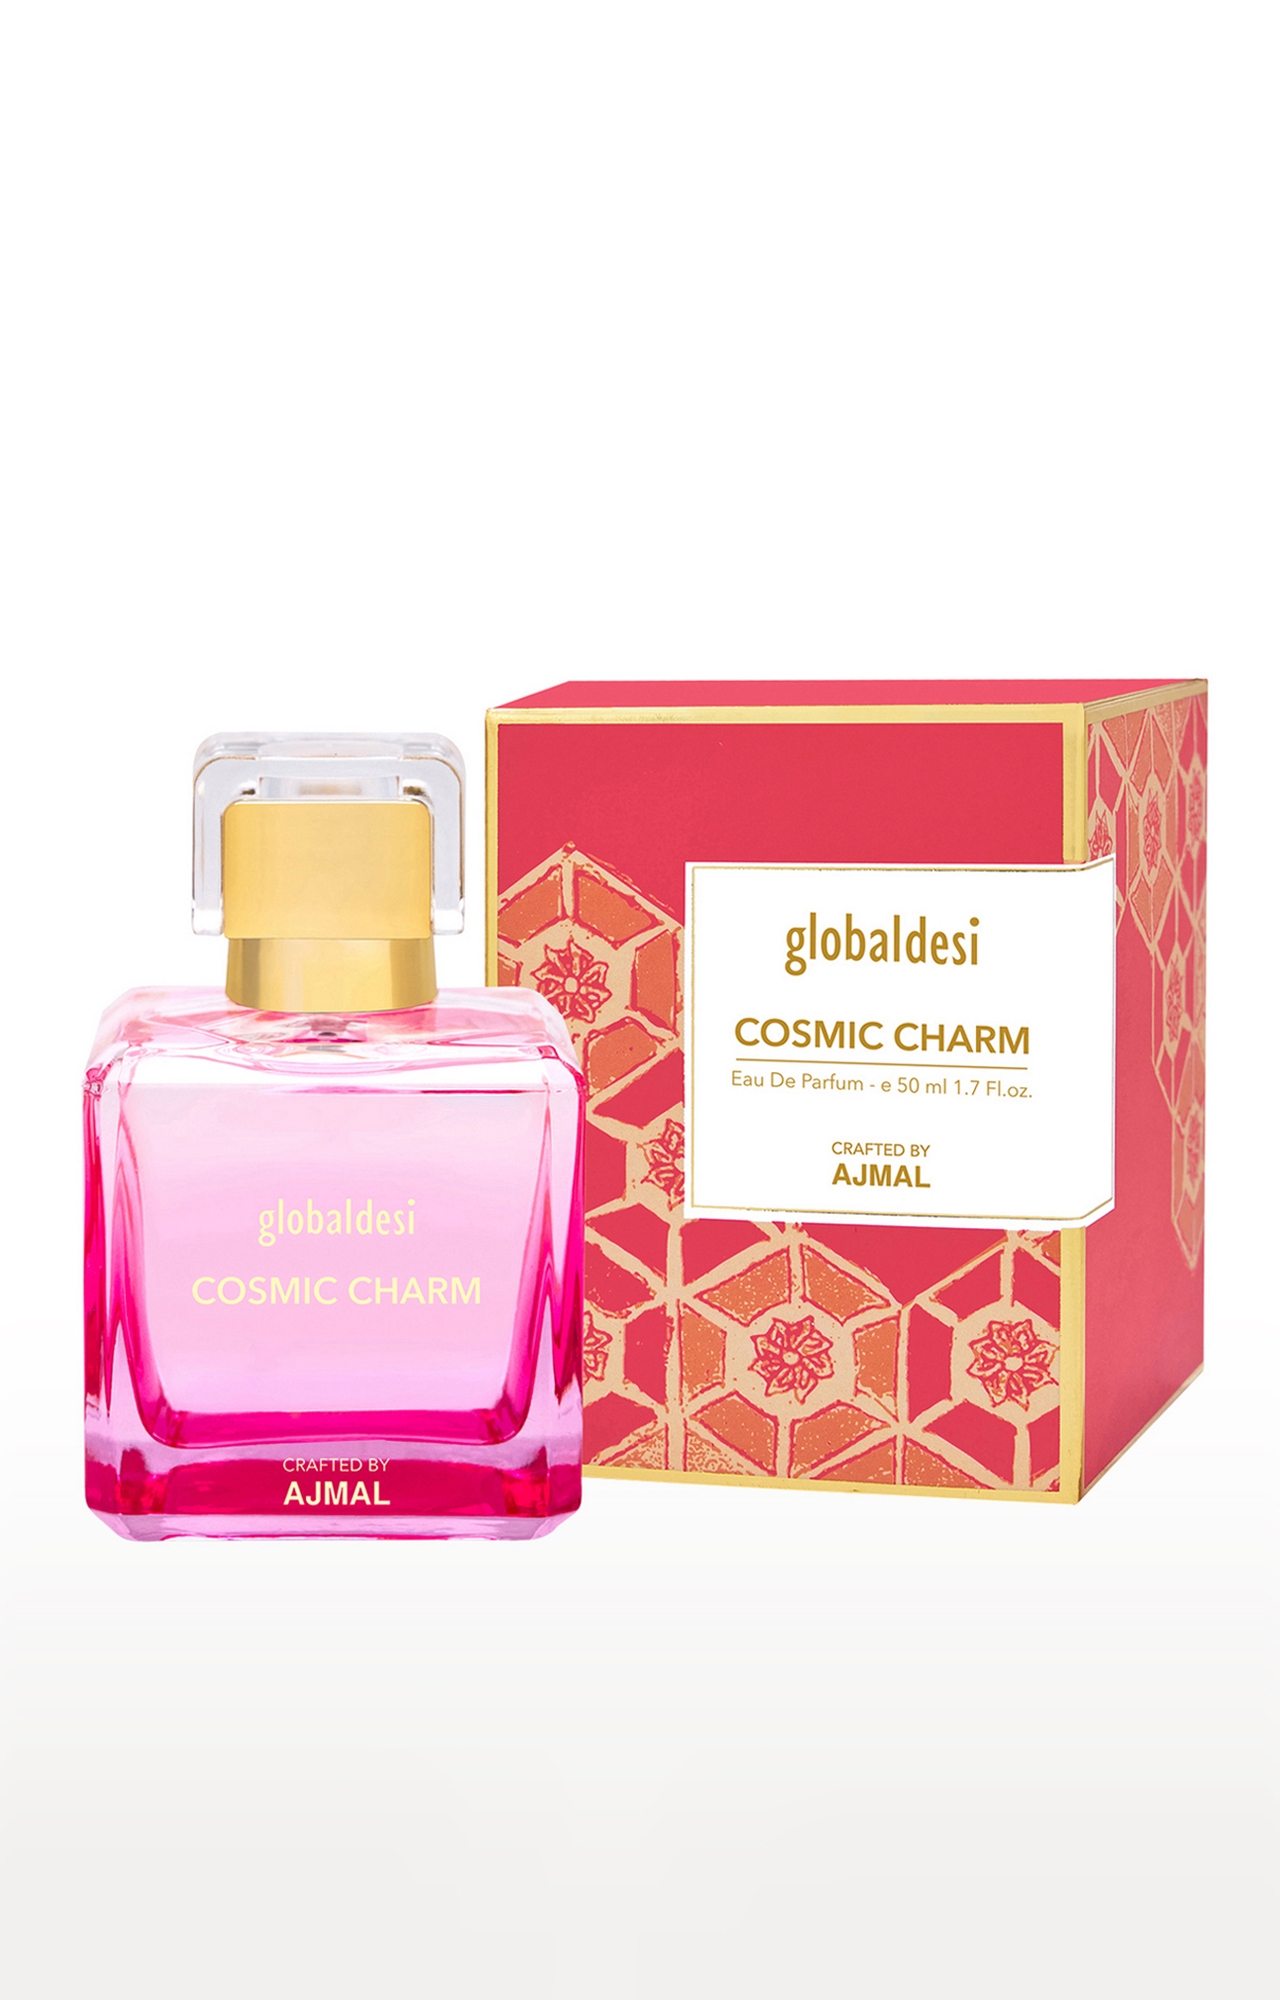 Global Desi Crafted By Ajmal | Global Desi Cosmic Charm Eau De Parfum 50ML Long Lasting Scent Spray Gift For Women Crafted By Ajmal 0